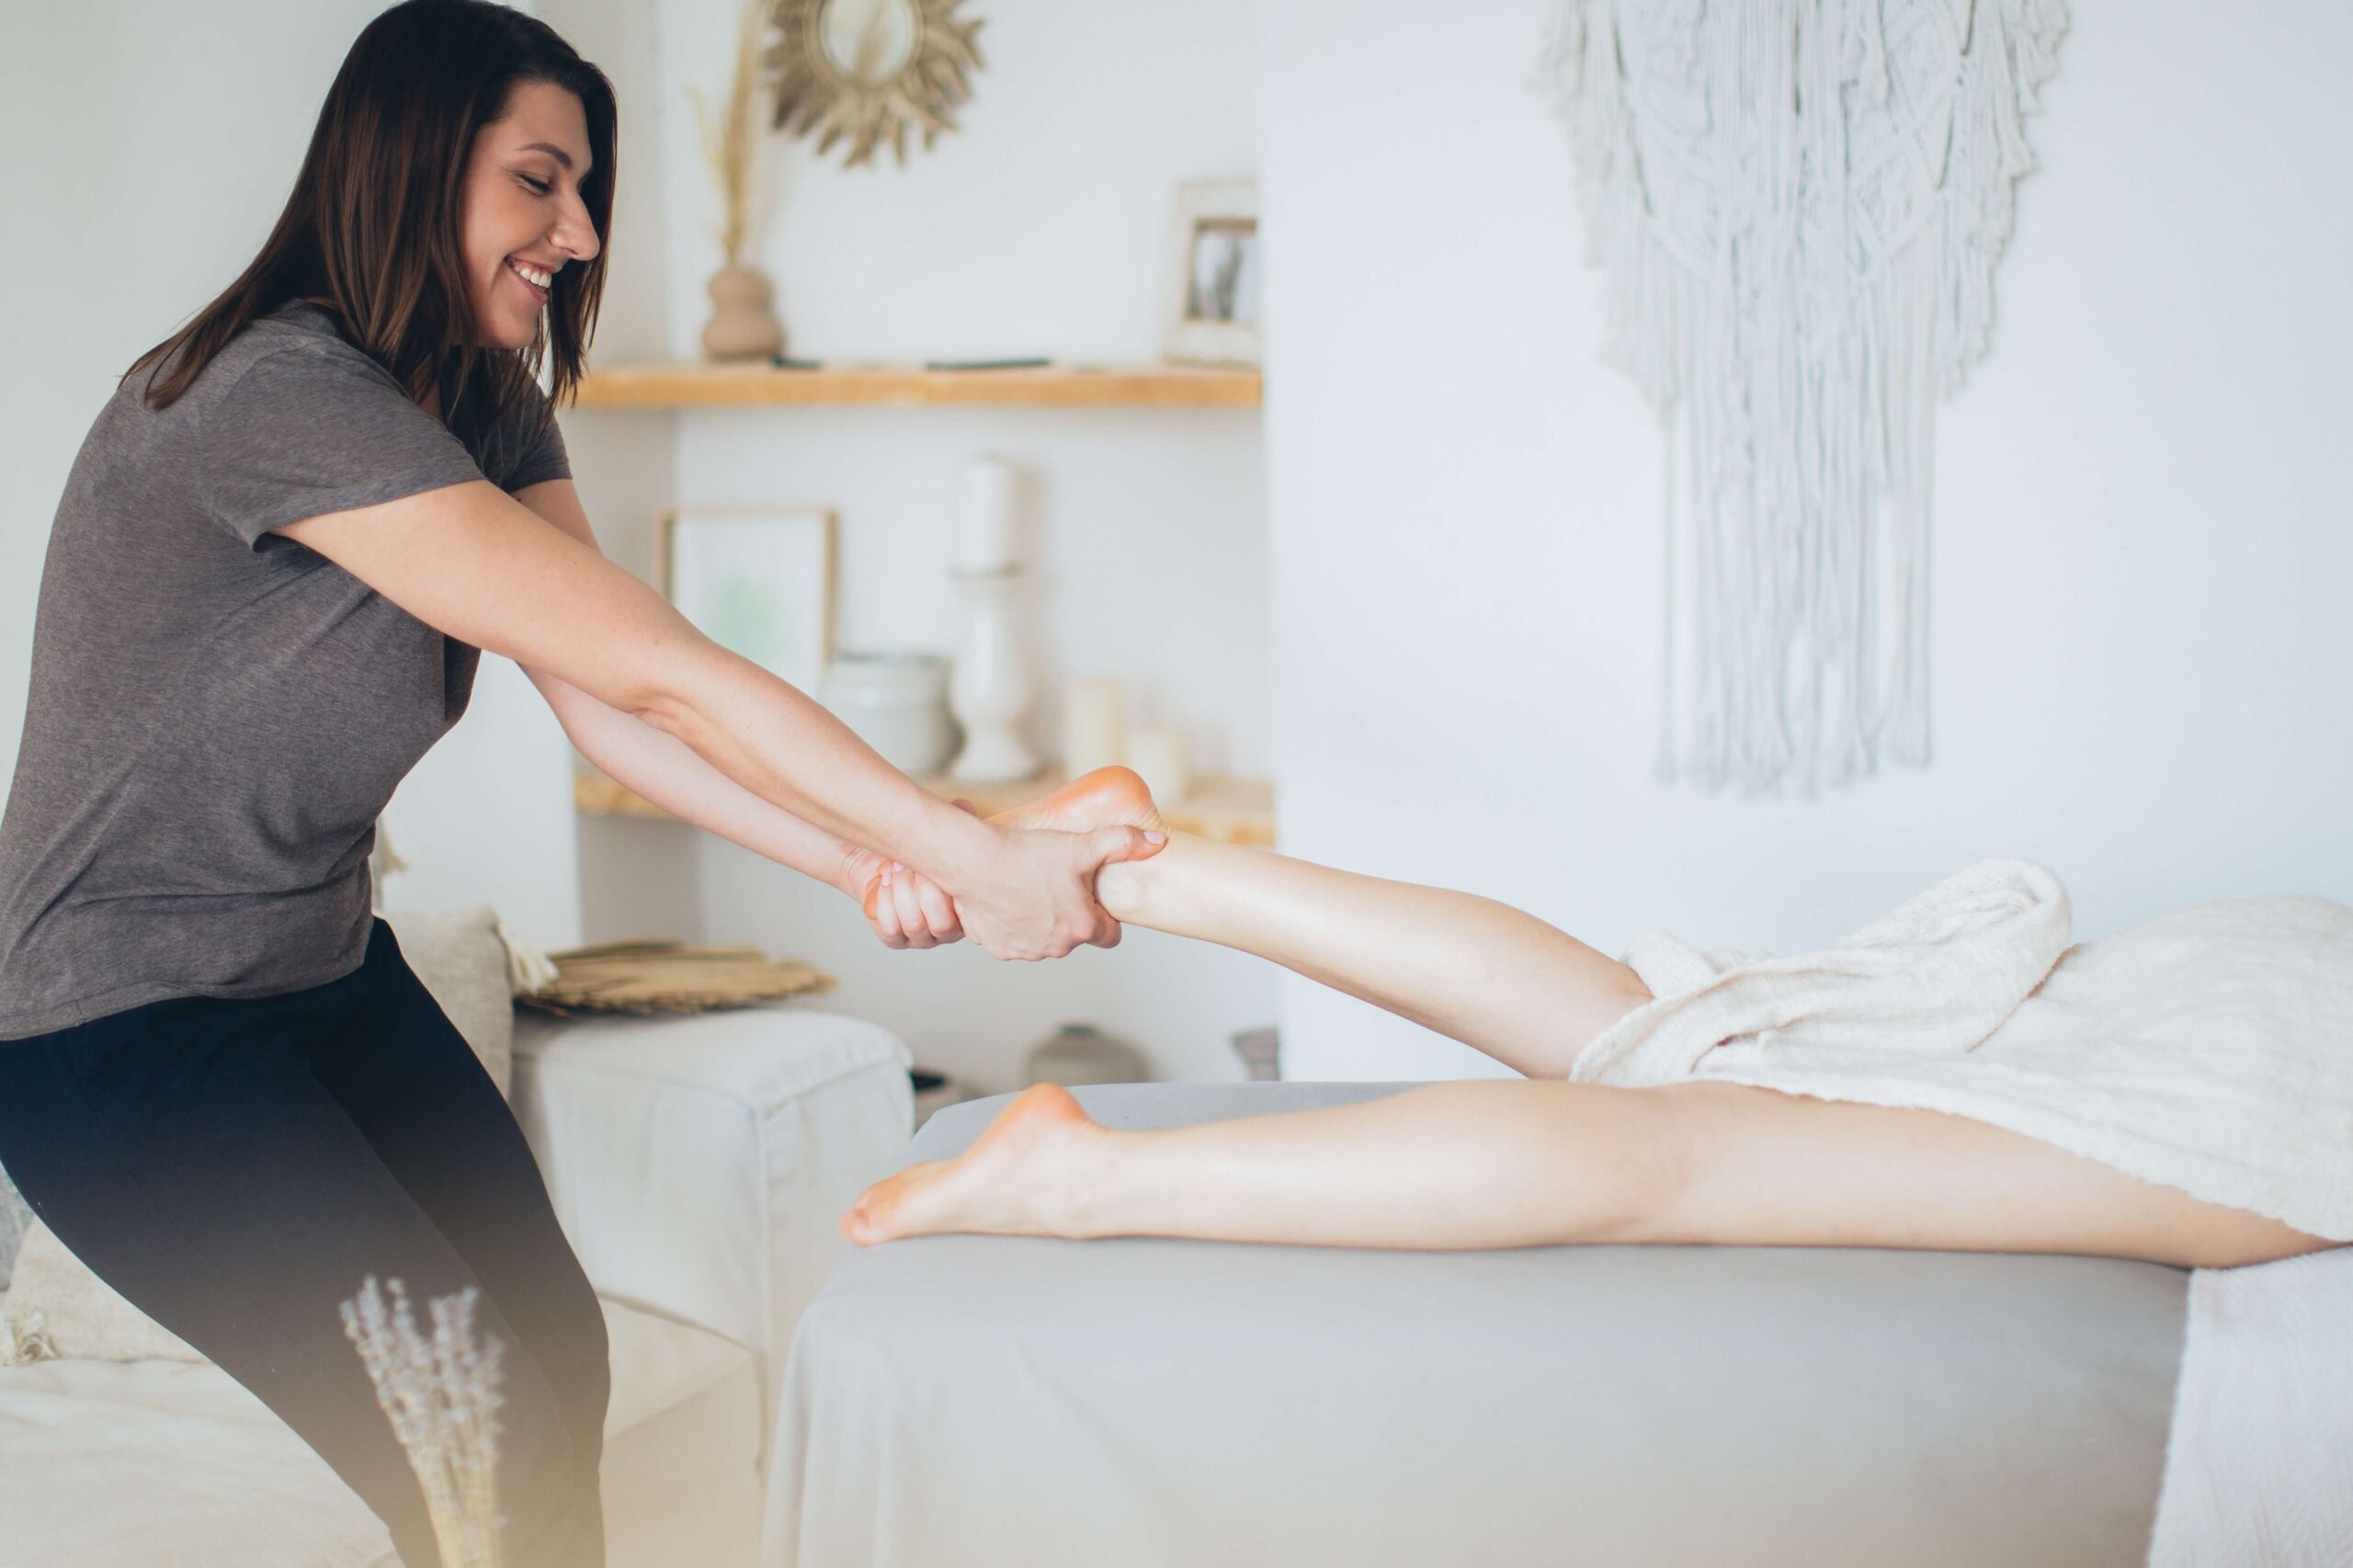 9 Things to Look for in an In-Home Massage Therapist